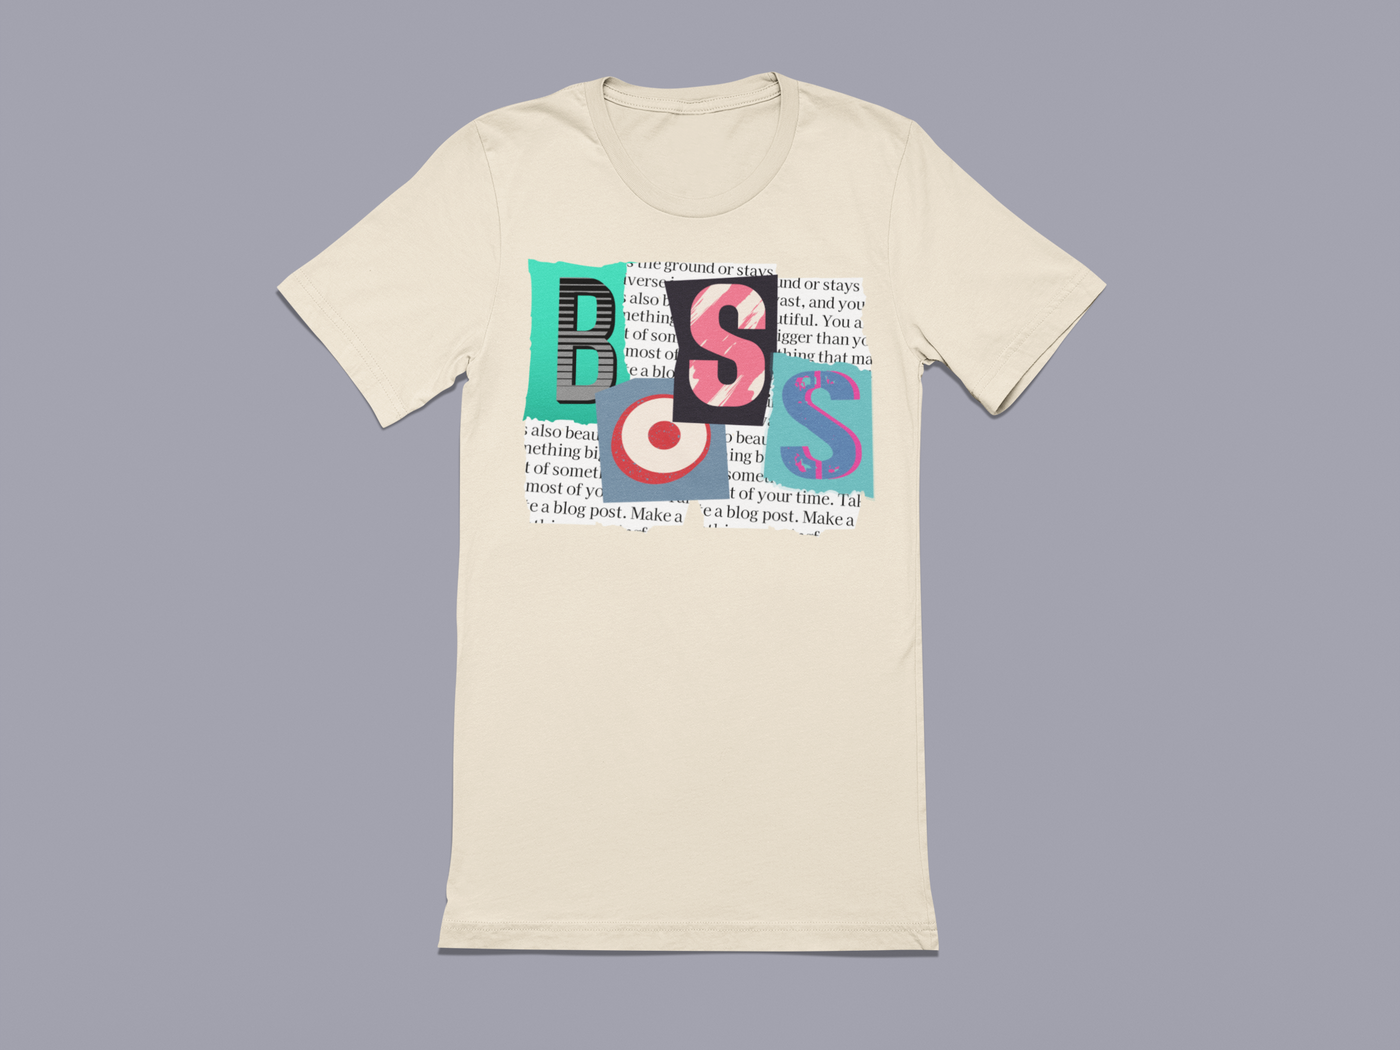 Boss Newspaper Clippings - Graphic t-shirt